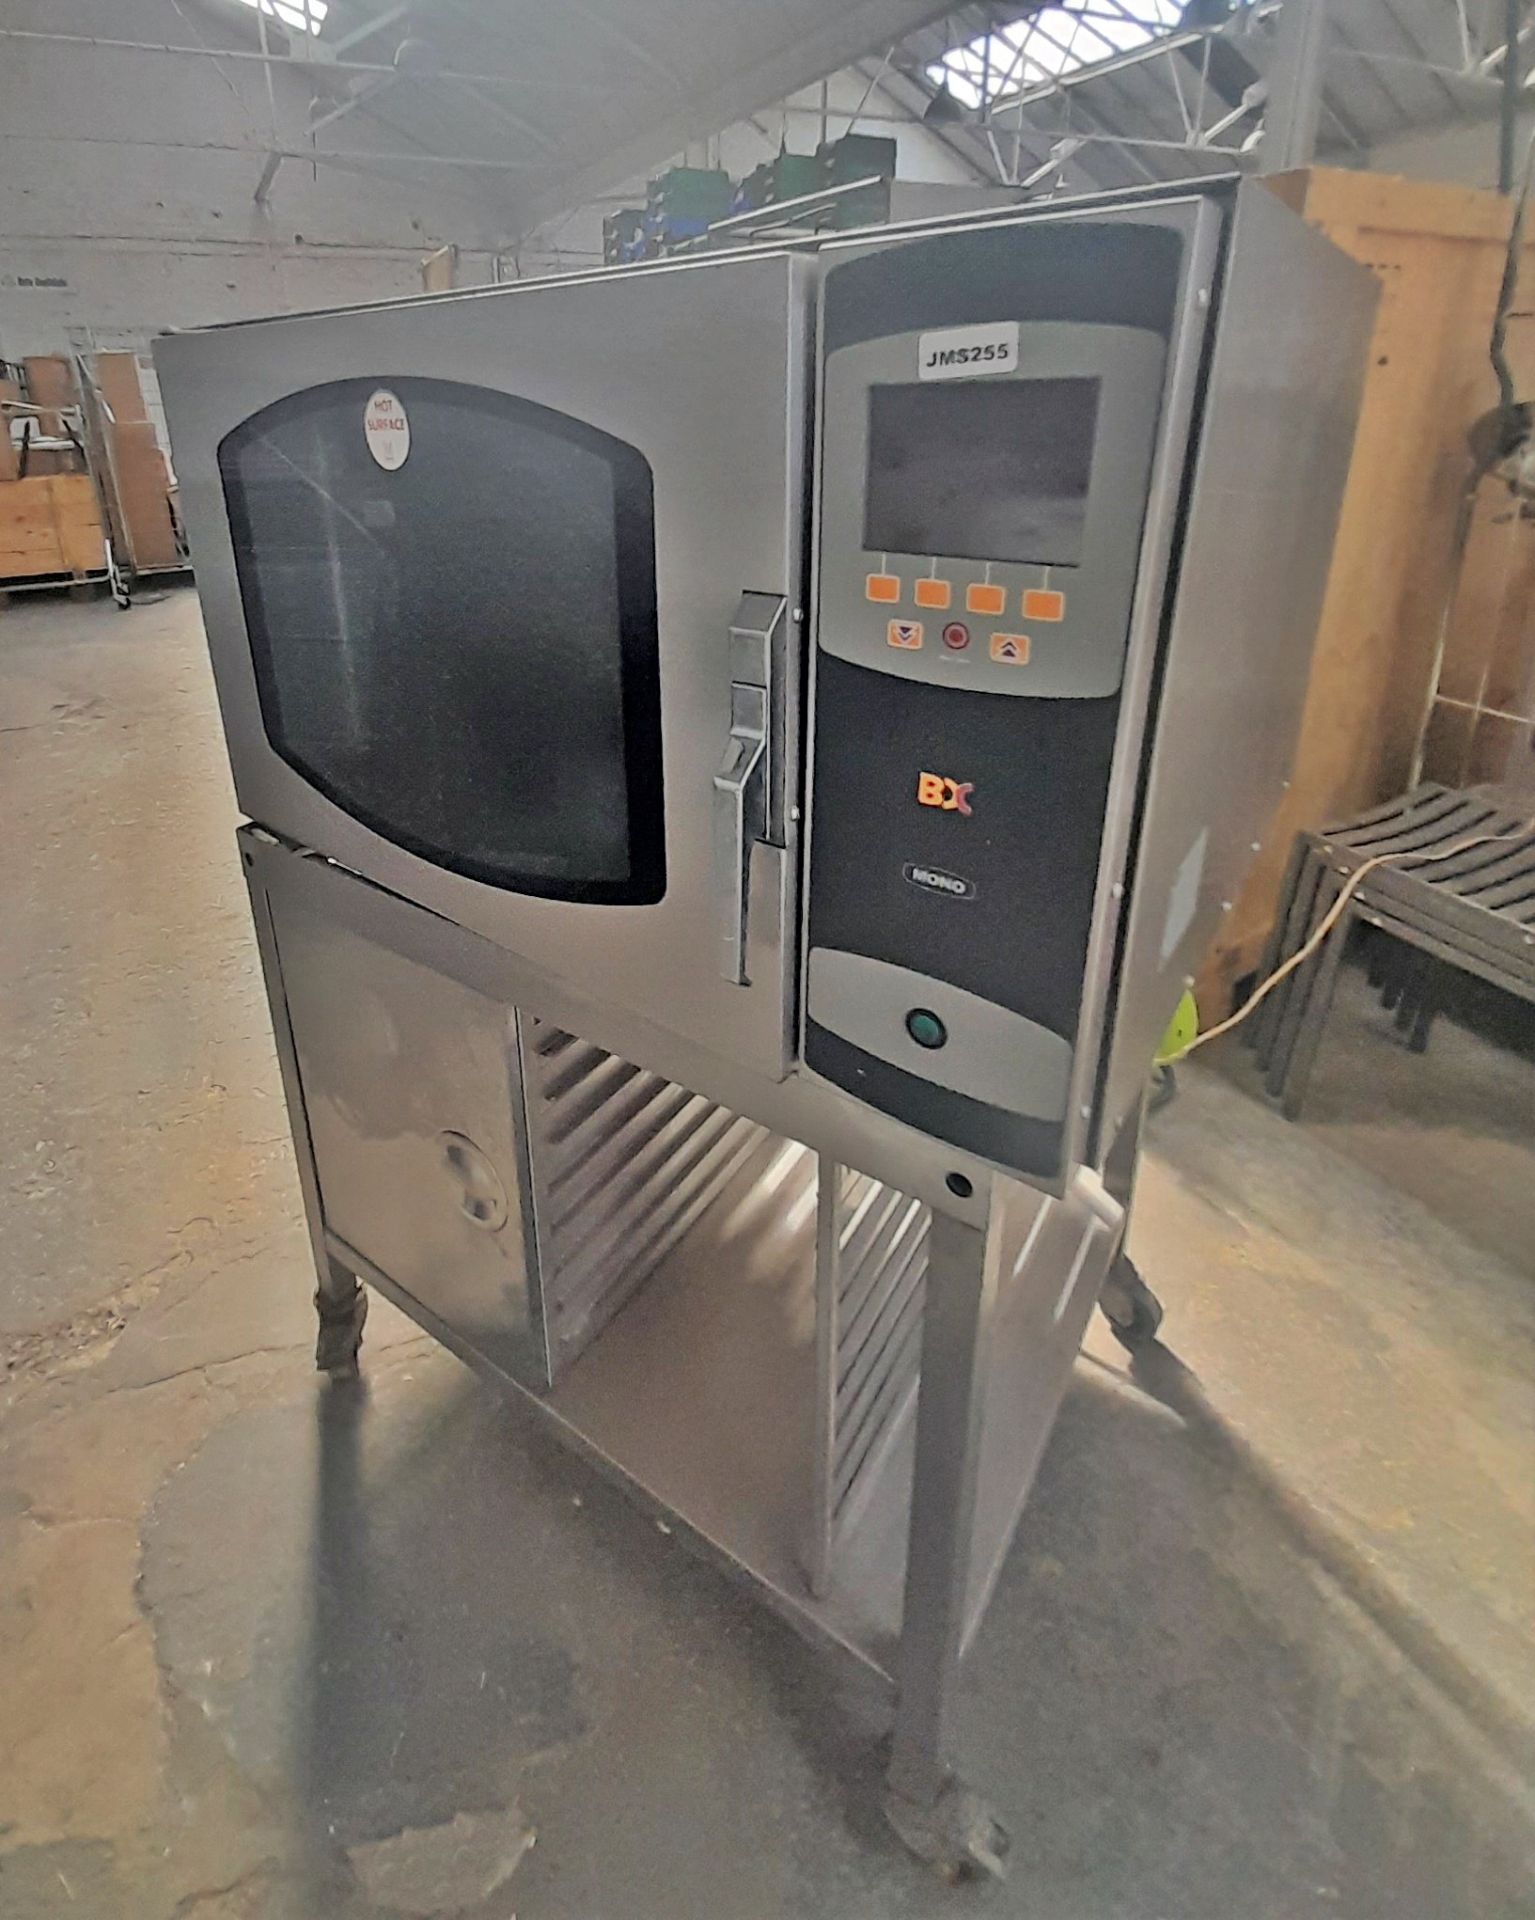 1 x Mono BX Bakery Oven With Stand - 3 Phase Power - Image 7 of 8